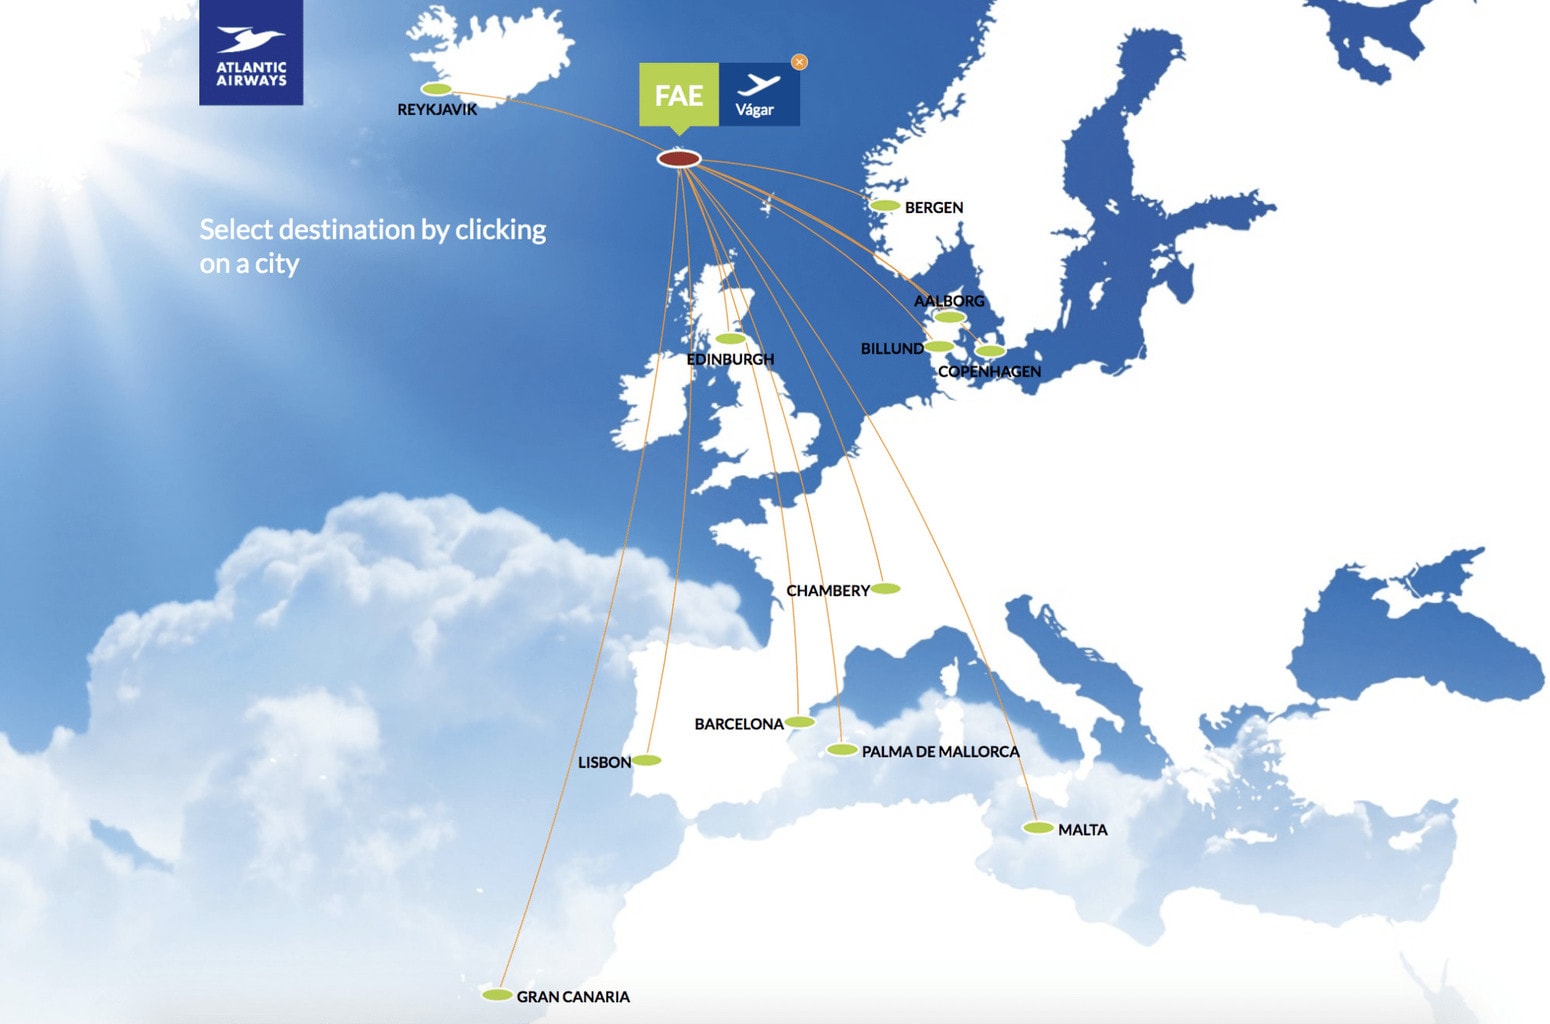 Route map from Atlantic Airways